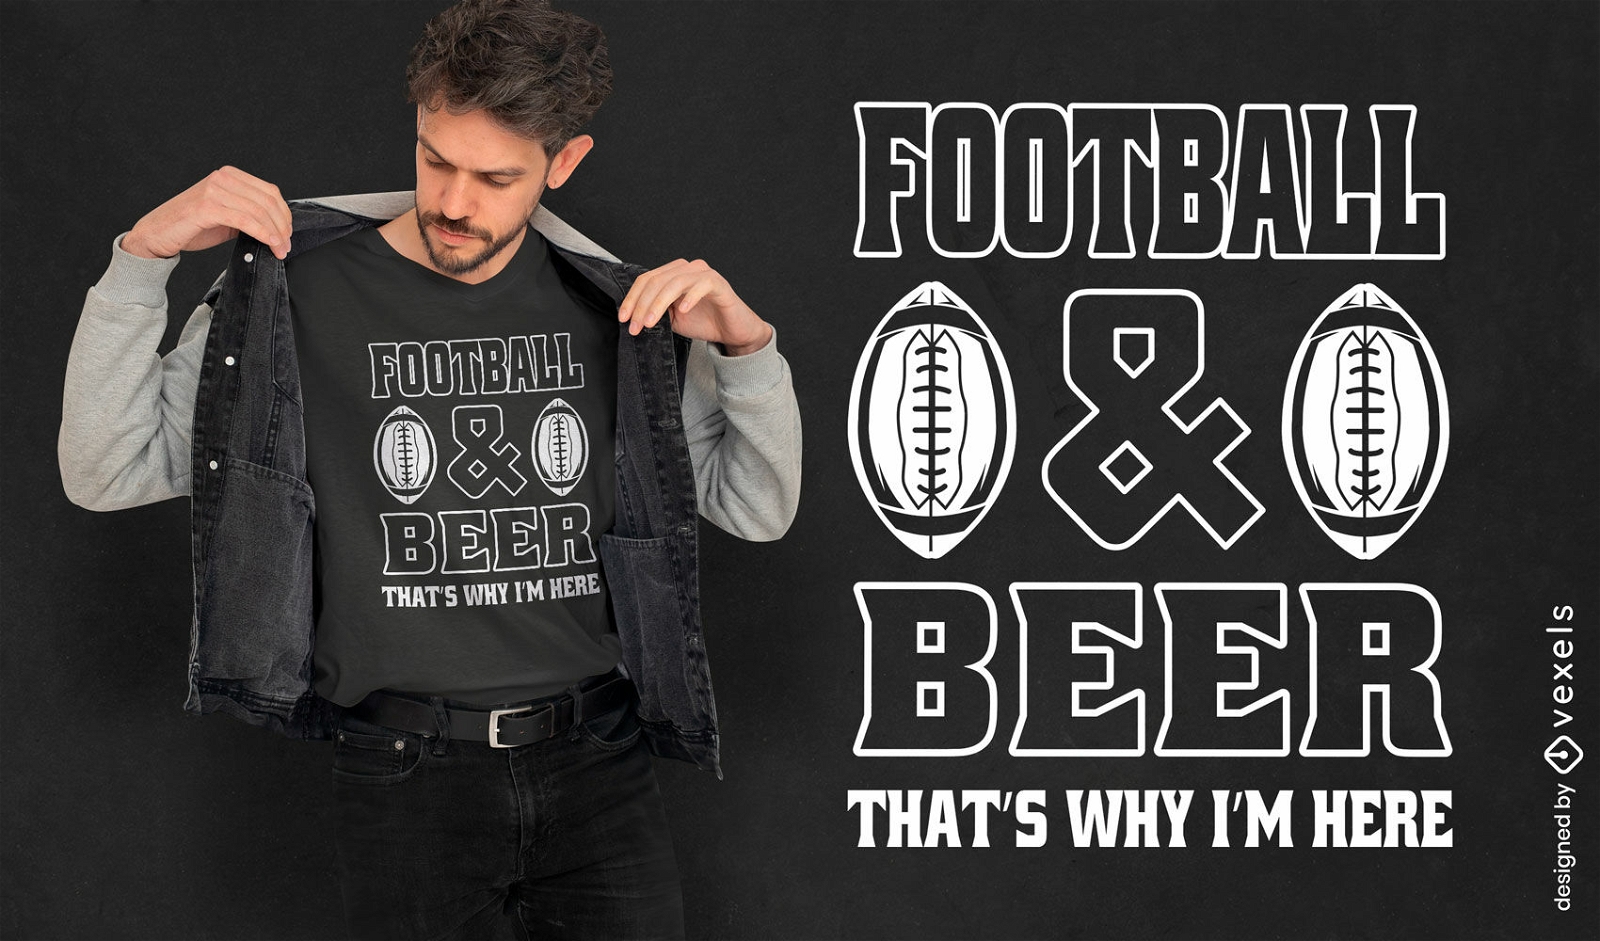 American football and beer t-shirt design